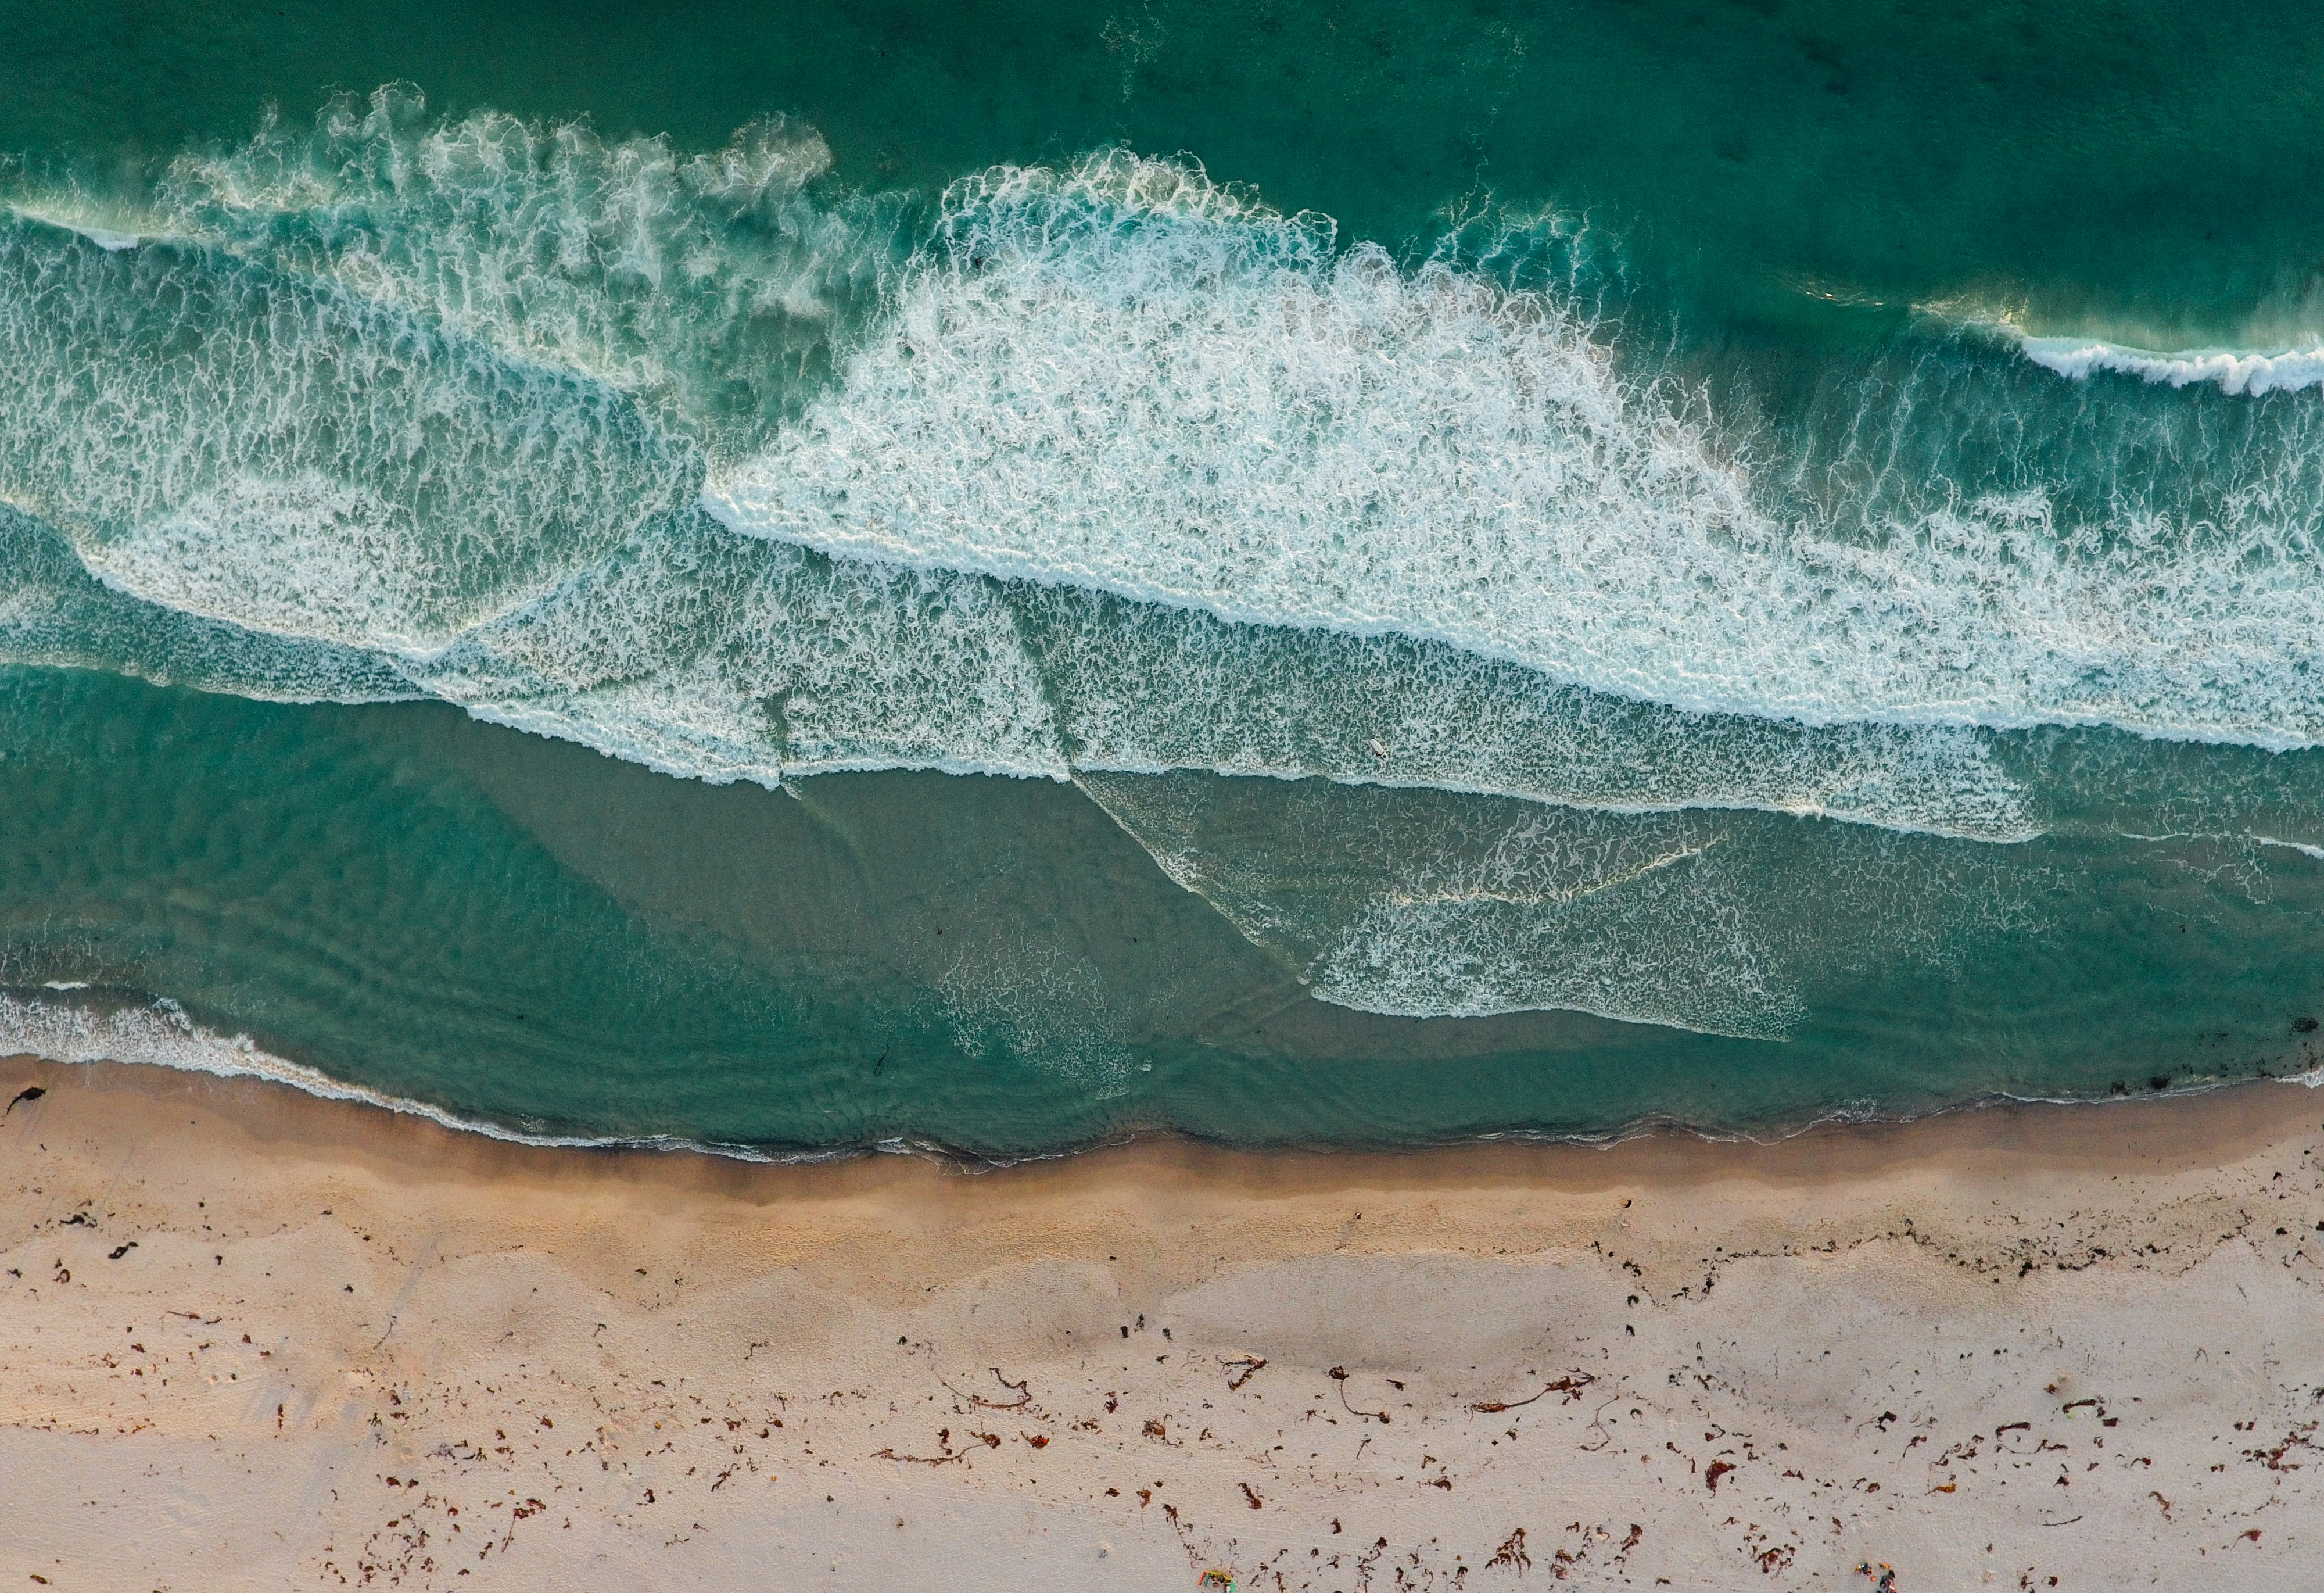 I took the drone out to the beach one day. The lighting was incredible and the water was a s blue as can be. There were a few people out on this particular beach. The beach was a bit down the coast so it was off the beaten path just a bit. I took the drone out of the car and got it prepped to fly. The sunwas hitting the water and sand int he most perfect way. Next thing I knew, the drone was up in the air at about 350’. I wanted to enjoy the scenery more the then tech i had to capture it. 

Email me if you use this. I want to see what you do with it! george@coxstudios.net

Cheers